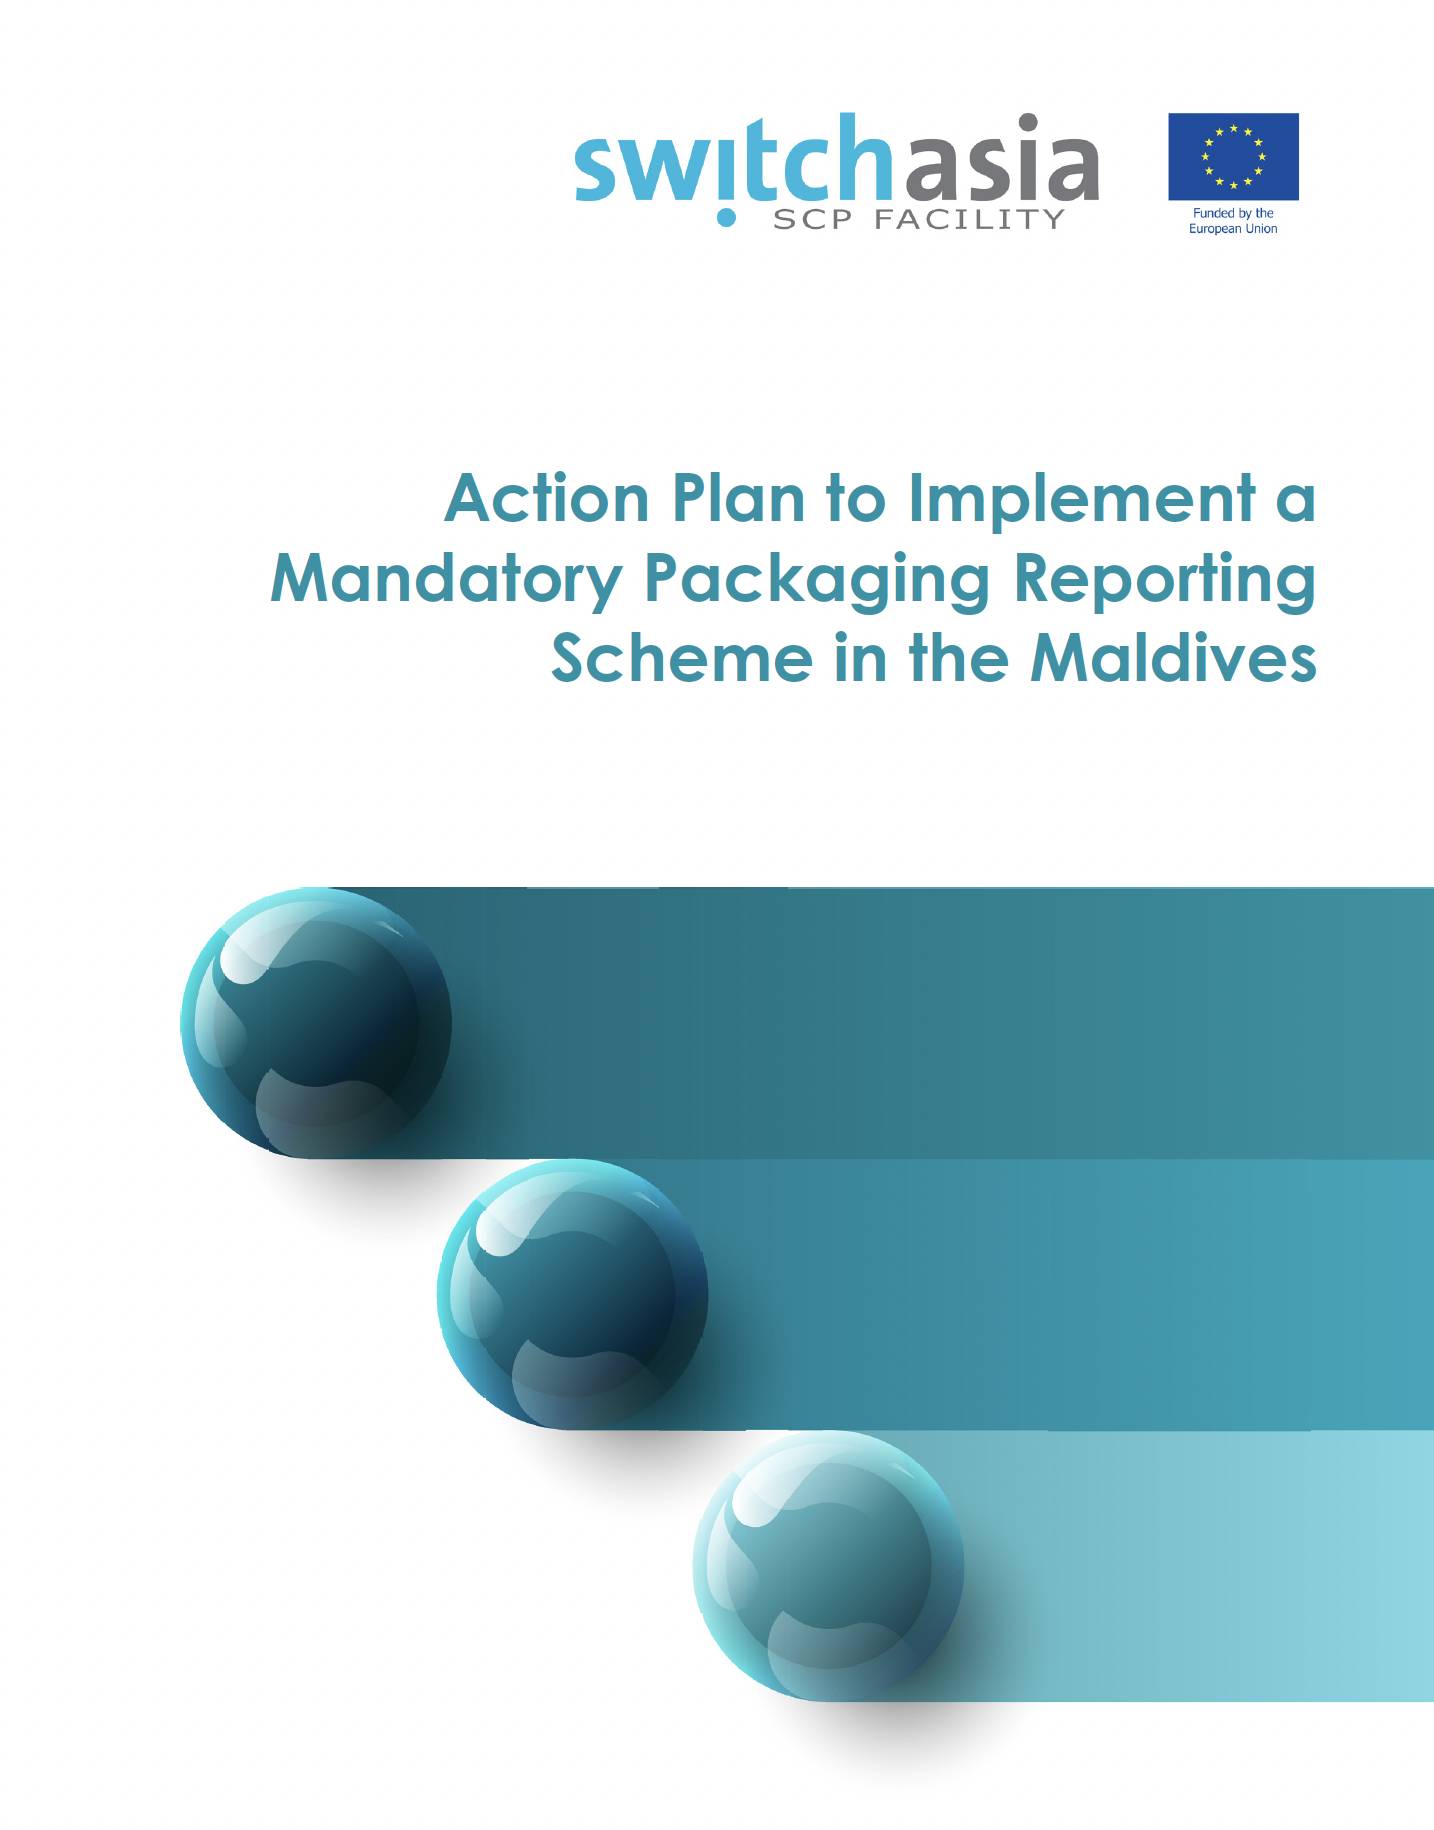 Action Plan to Implement a Mandatory Packaging Reporting Scheme in the Maldives3644